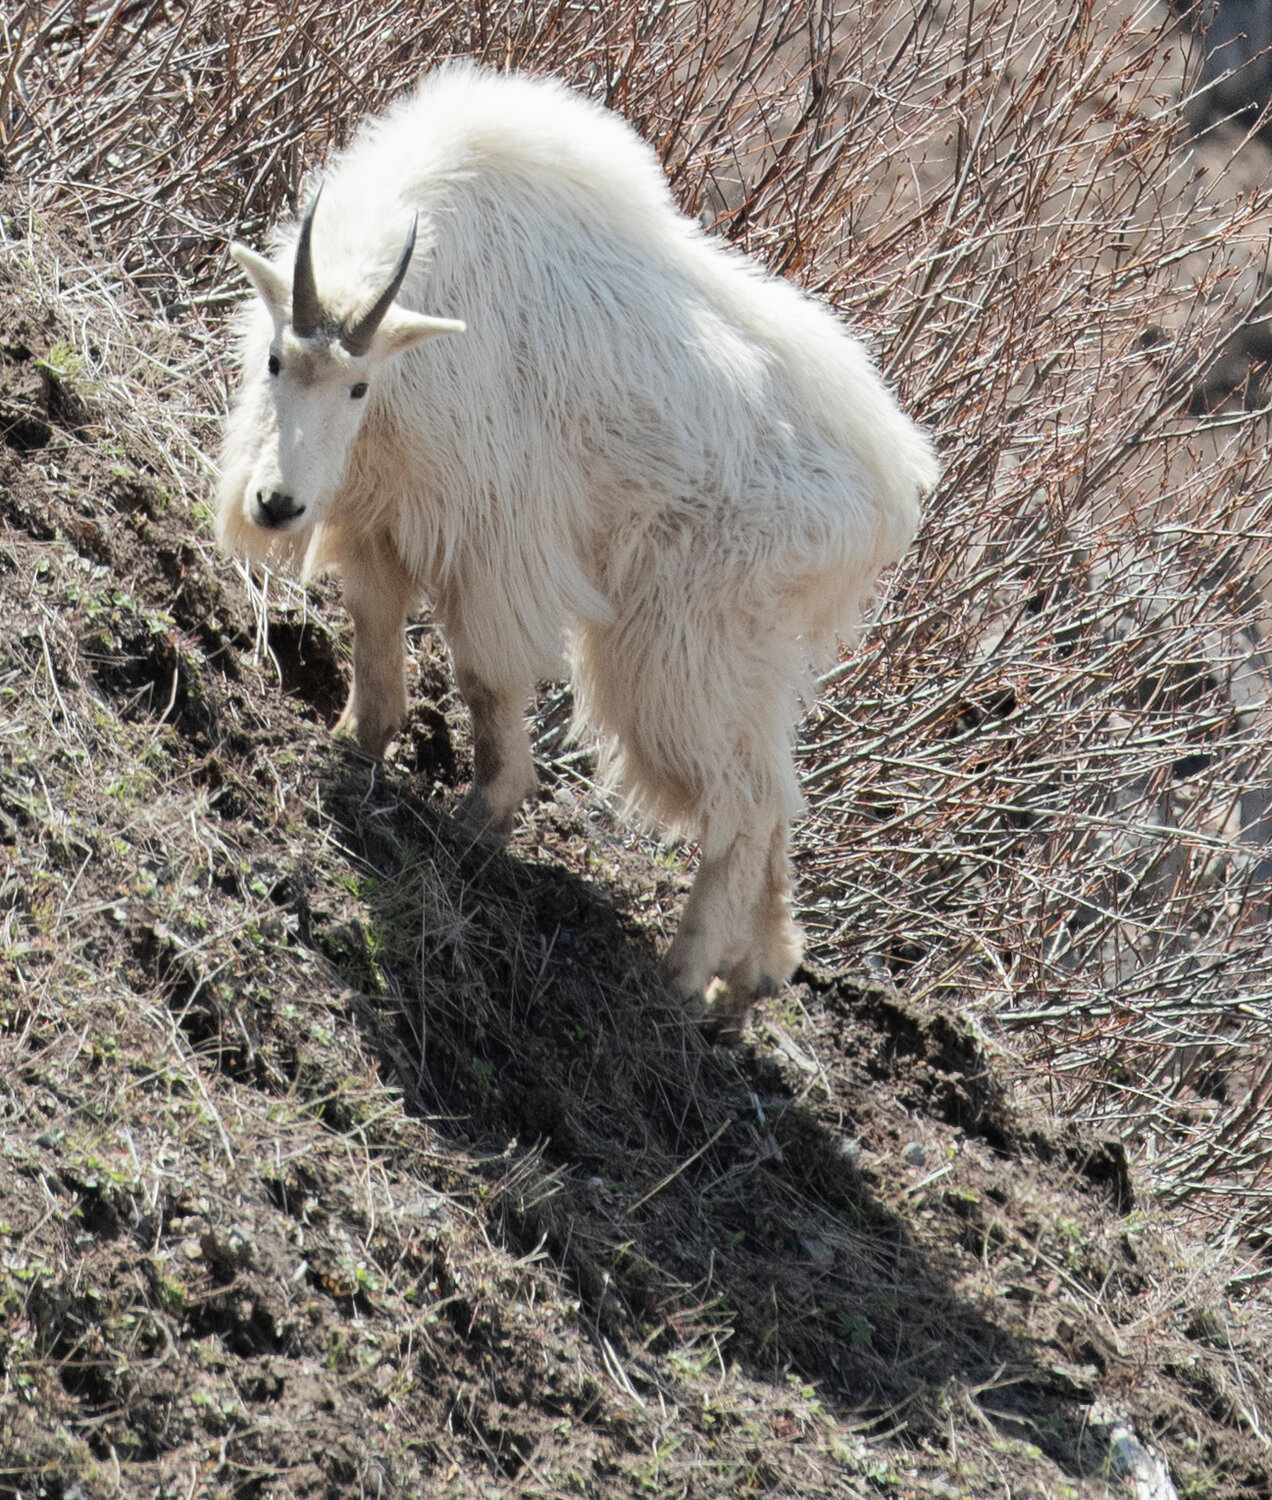 A large mountain goat’s haunches cast a shadow against the hills near Mount St. Helens by the Johnston Ridge Observatory on Thursday, May 11.